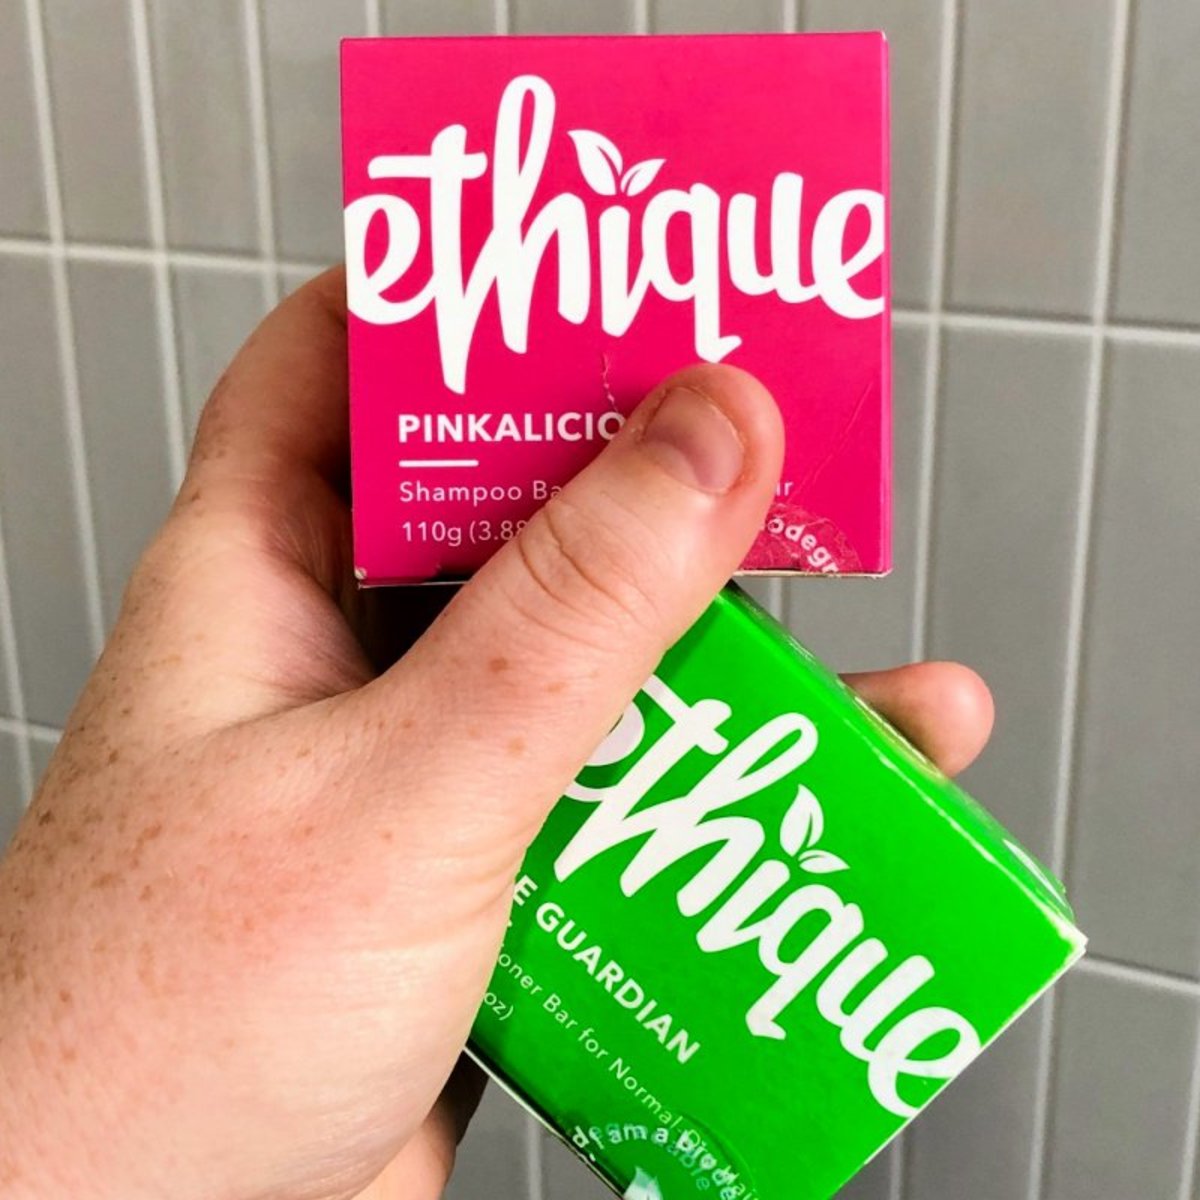 An Honest Ethique Shampoo And Conditioner Bars Review